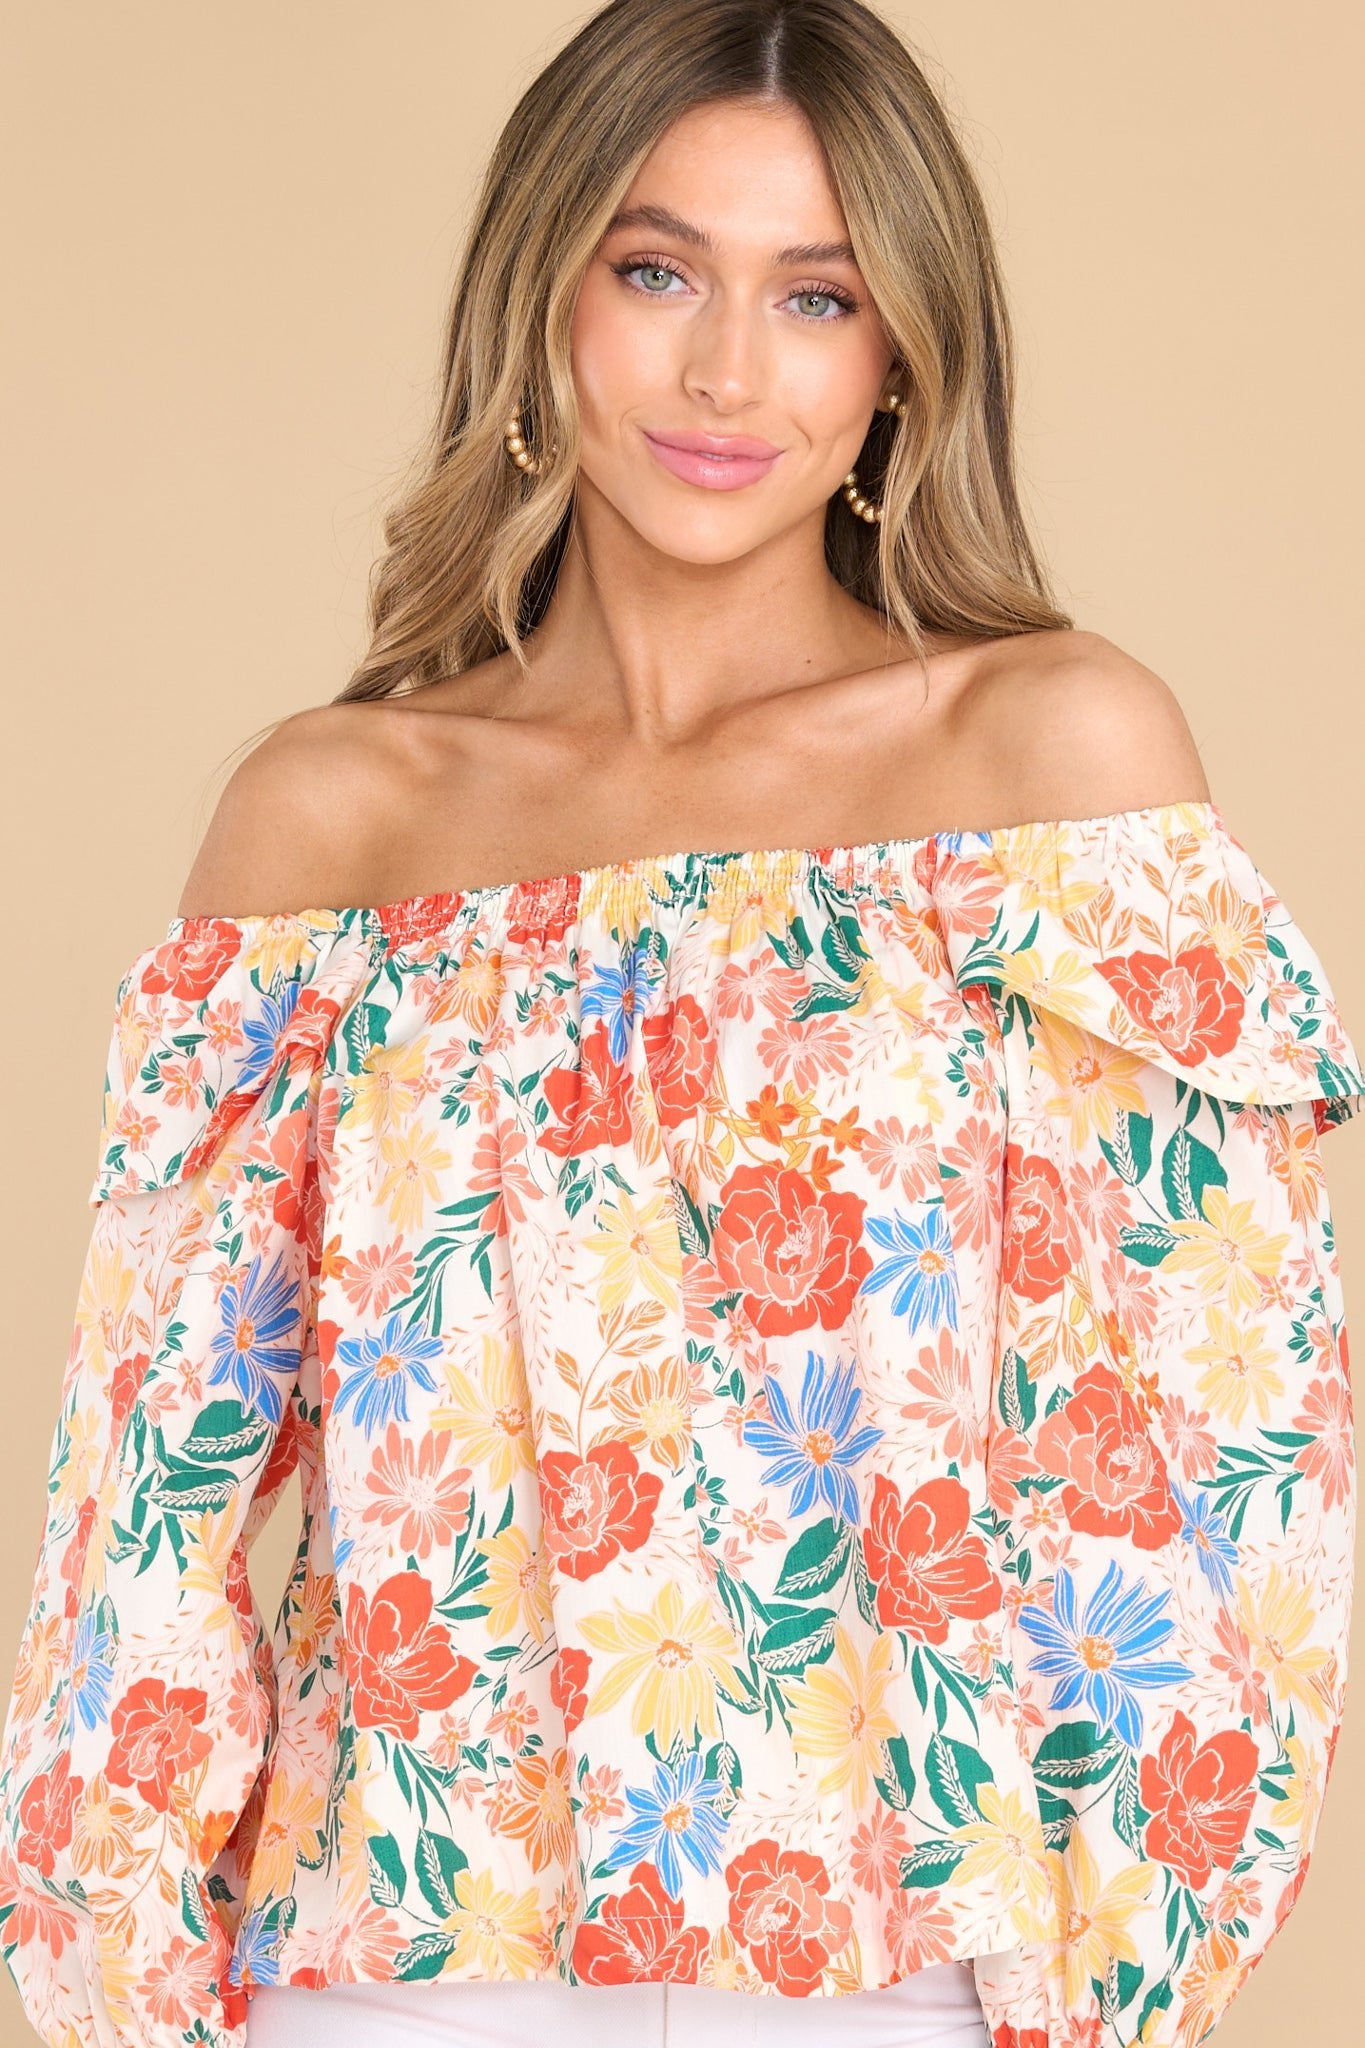 This ivory floral top features a stretchy scoop neckline, an optional off-the shoulder style, ruffle detailing in the shoulders, and long sleeves with elastic cuffs.